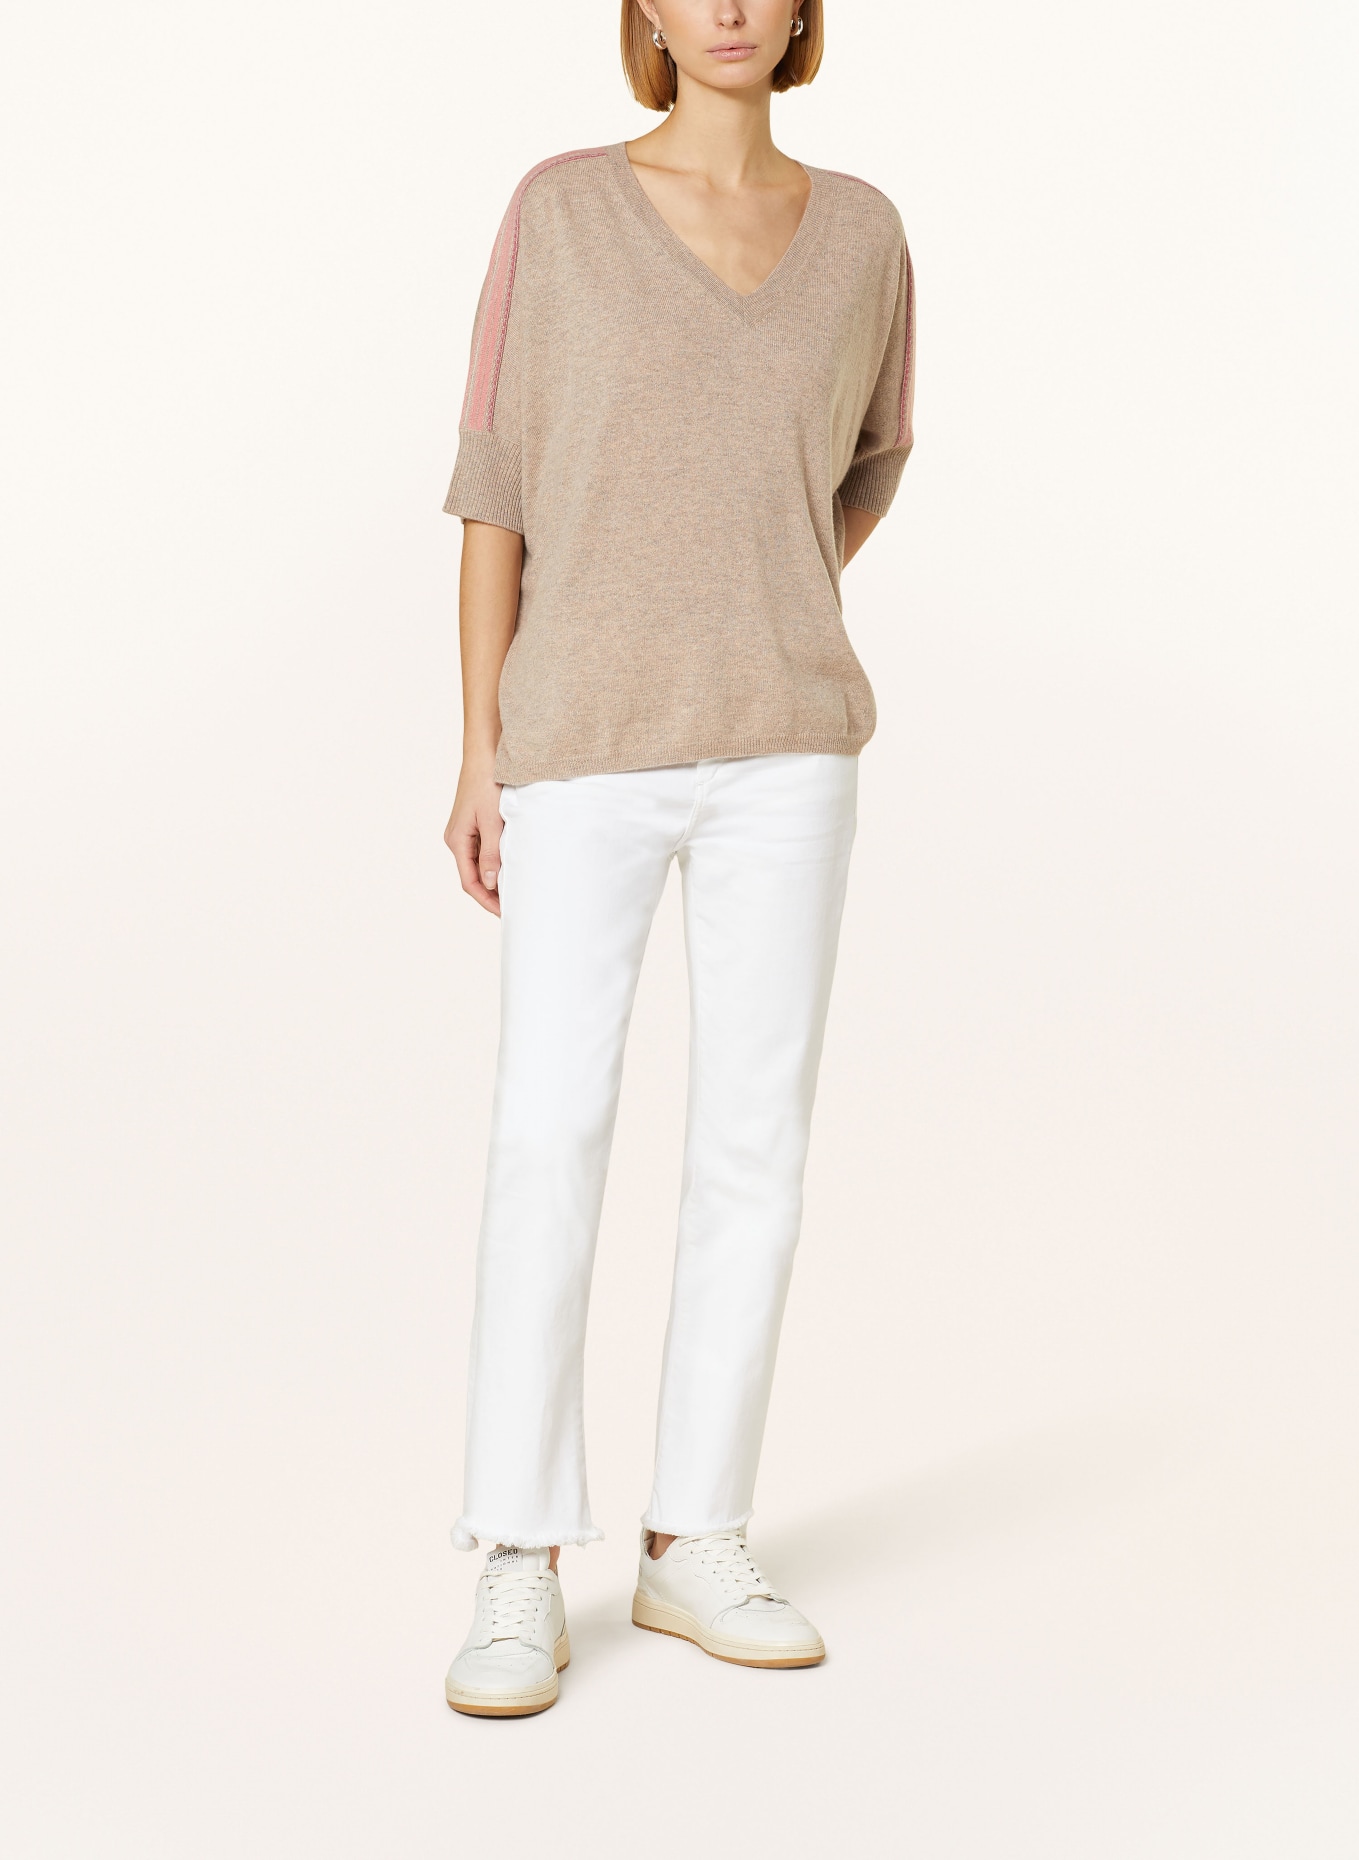 REPEAT Knit shirt in cashmere, Color: BEIGE (Image 2)